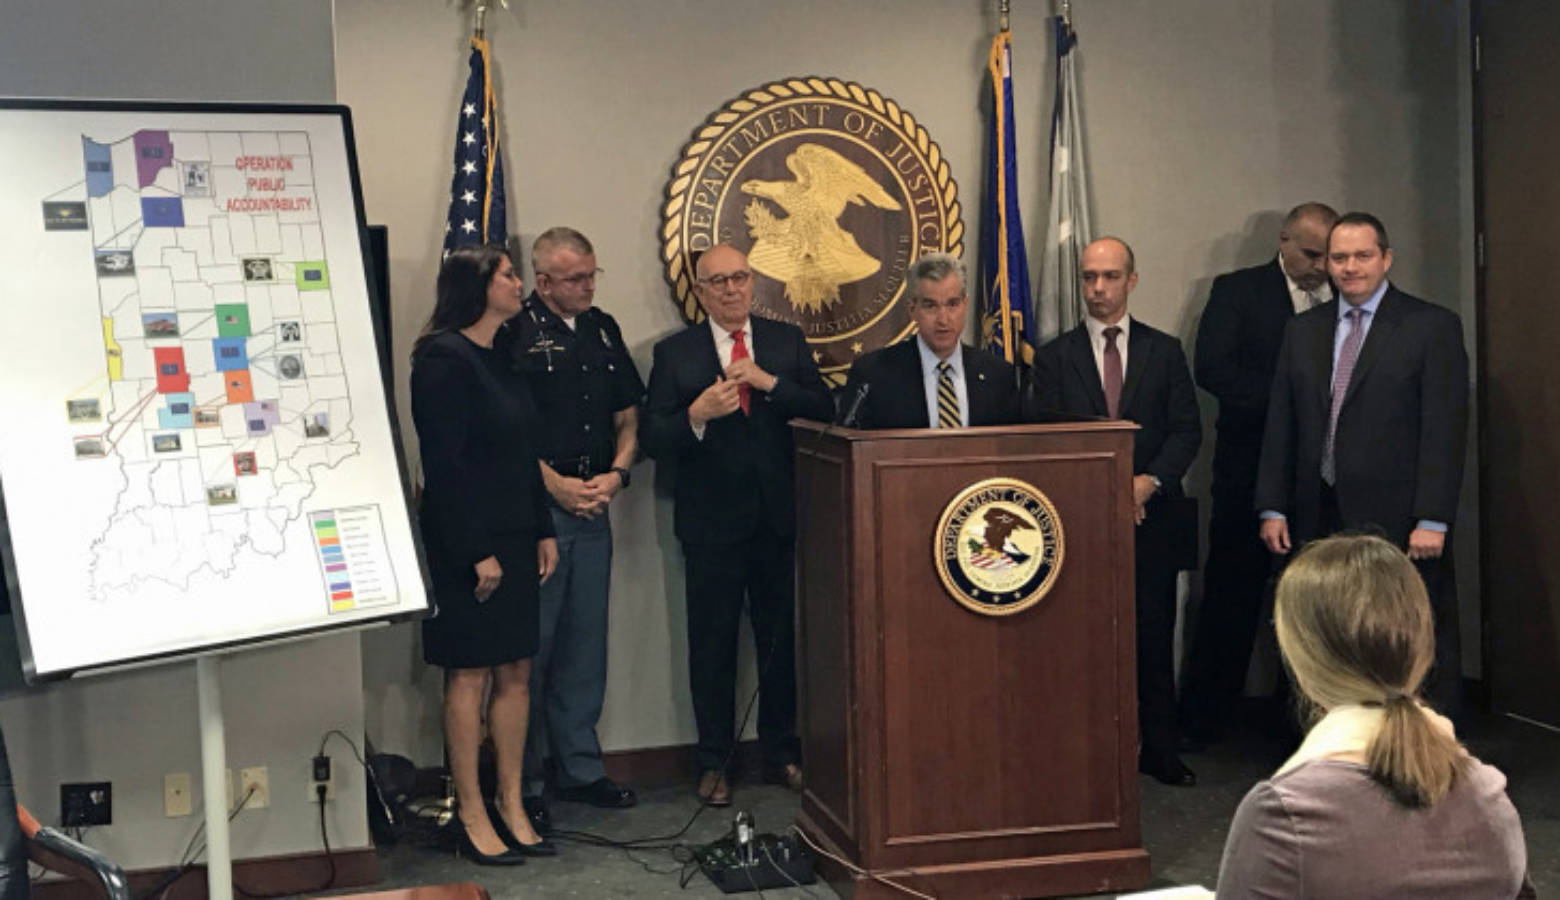 U.S. Attorney Josh Minkler says Indiana State Police helped in some rural areas, where catching this kind of crime can be a challenge for local law enforcement.